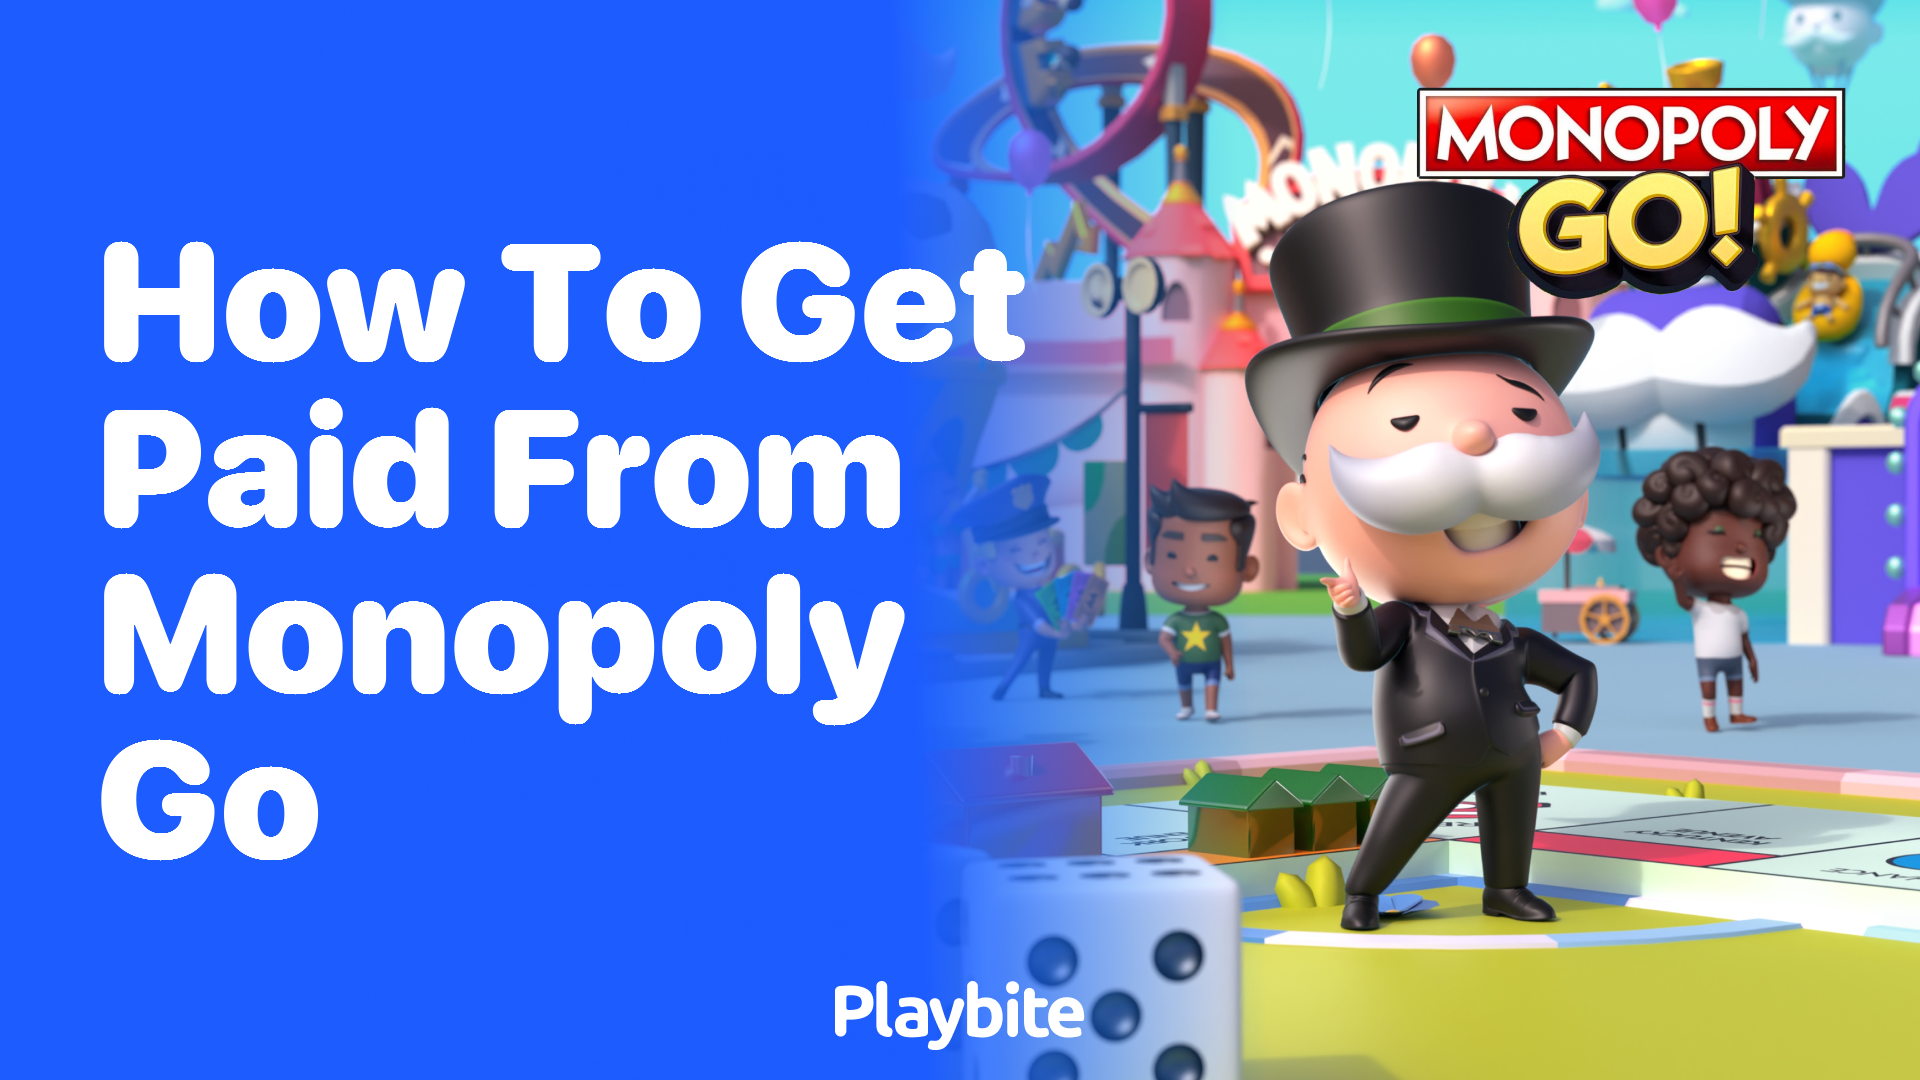 How to Get Paid from Monopoly Go: A Handy Guide